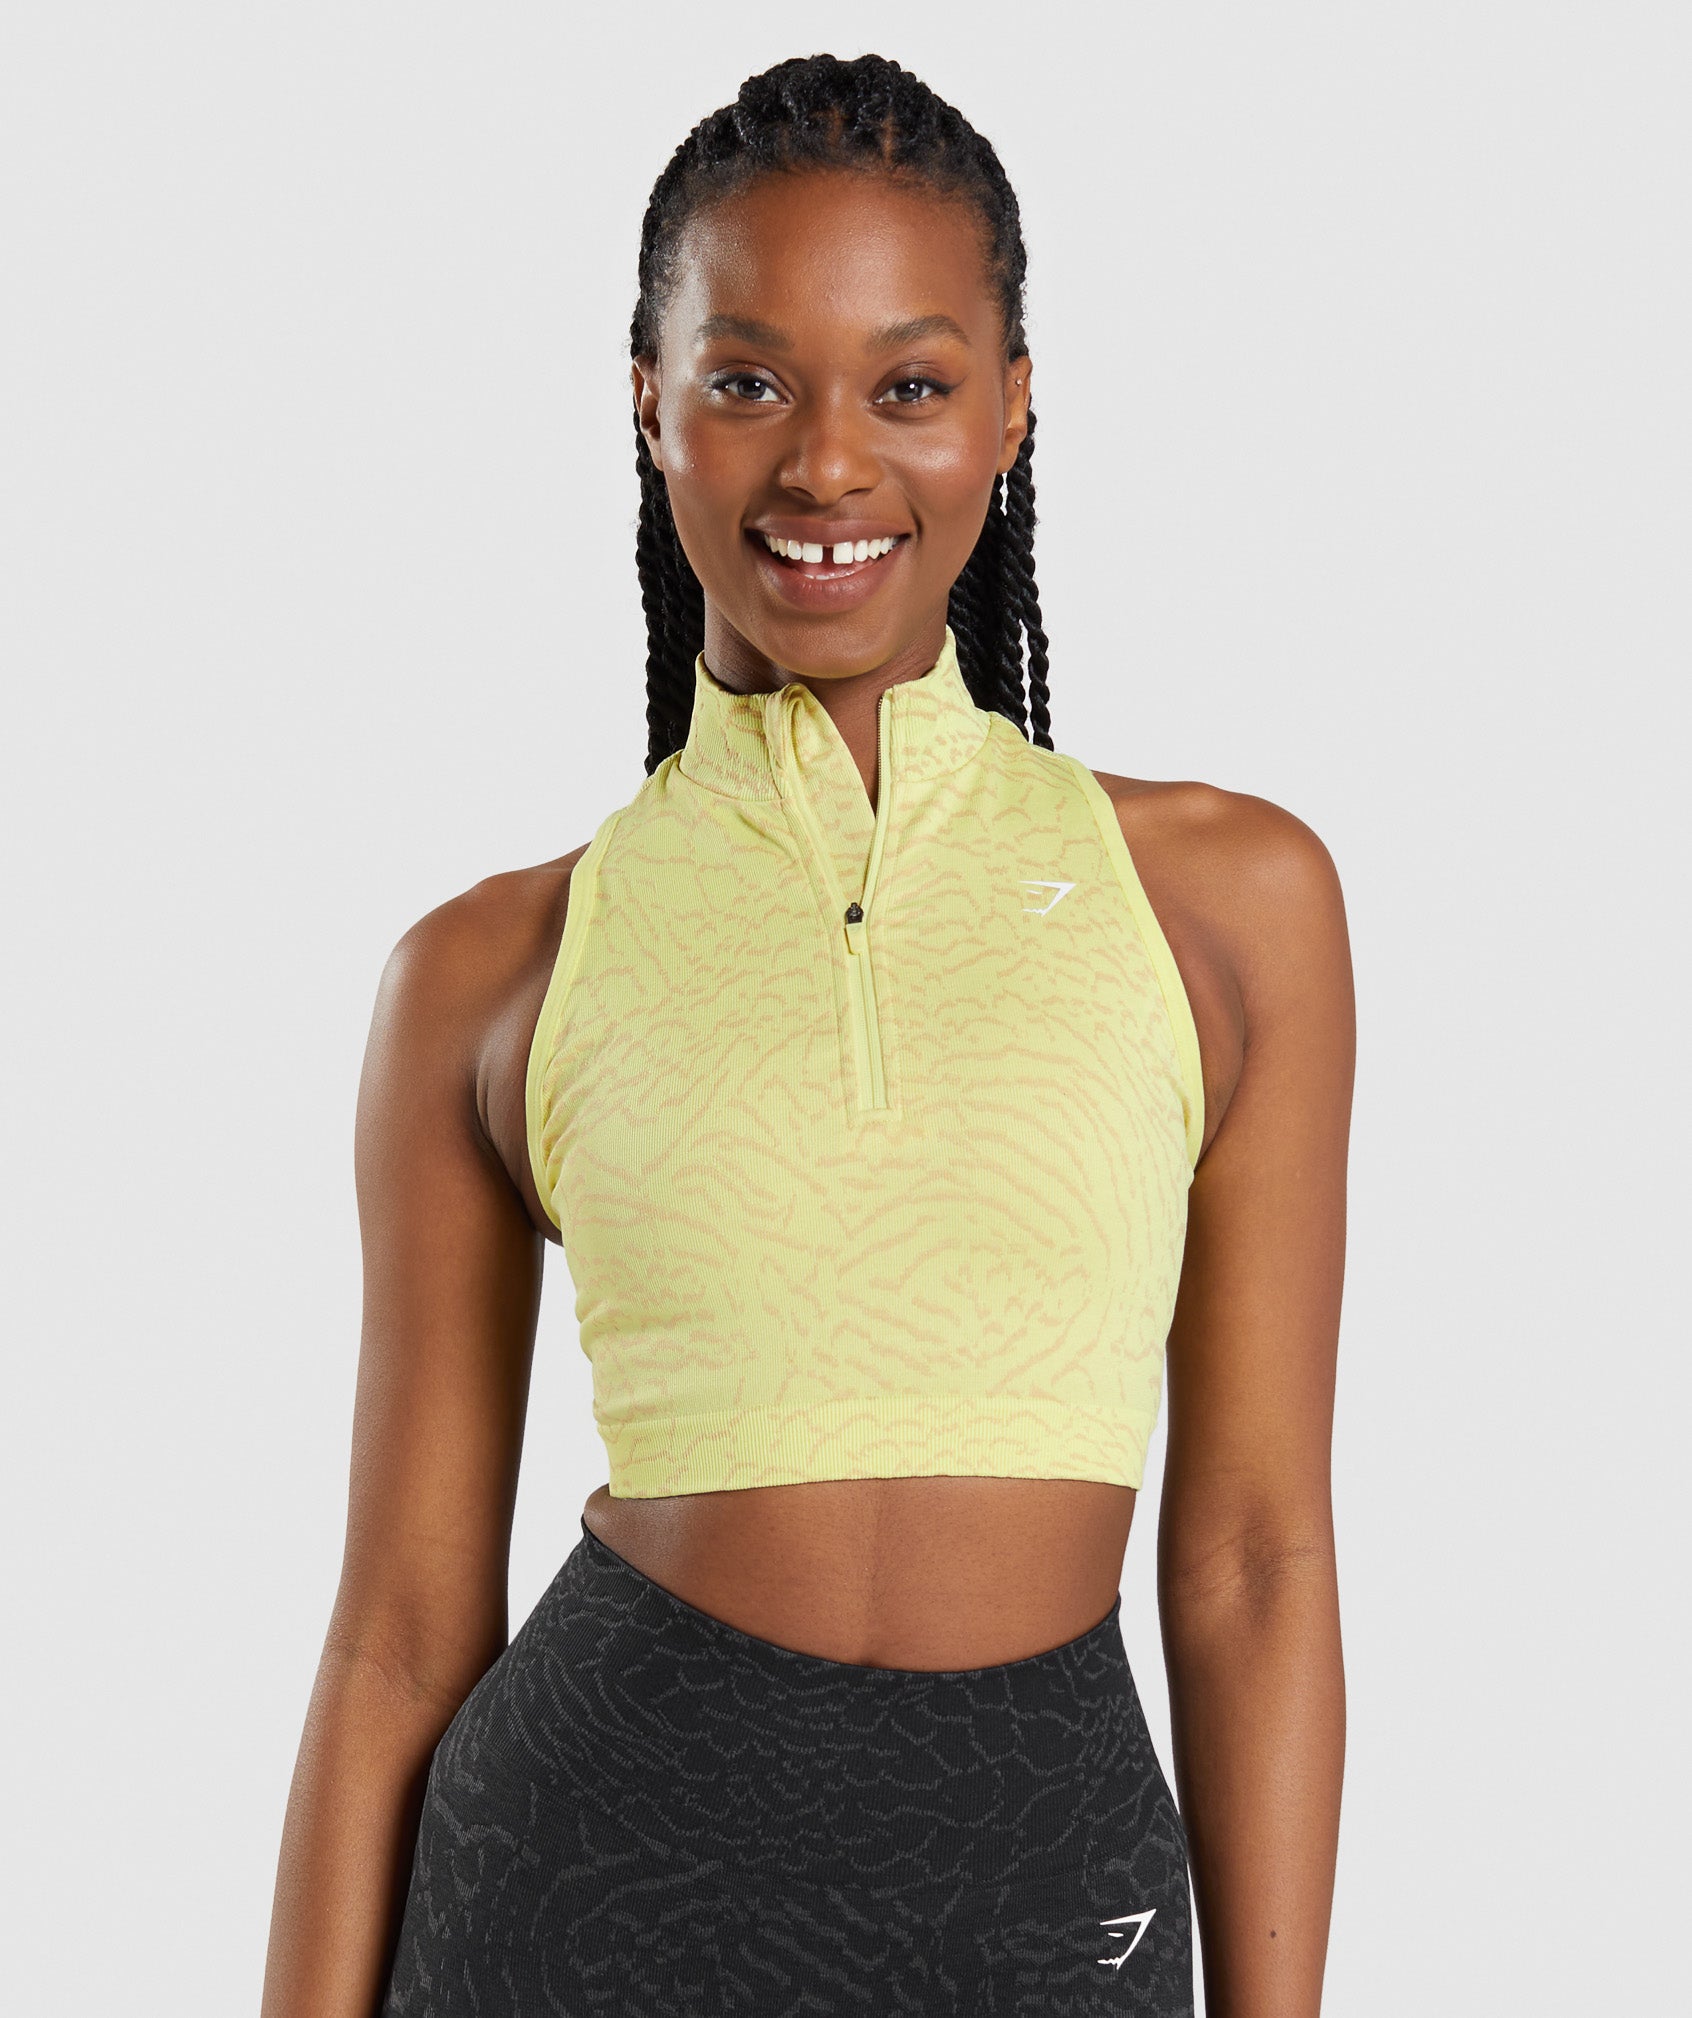 beep bop on X: I need the new @Gymshark yellow set but it's sold out. Help  a girl out. Where can I get it?  / X